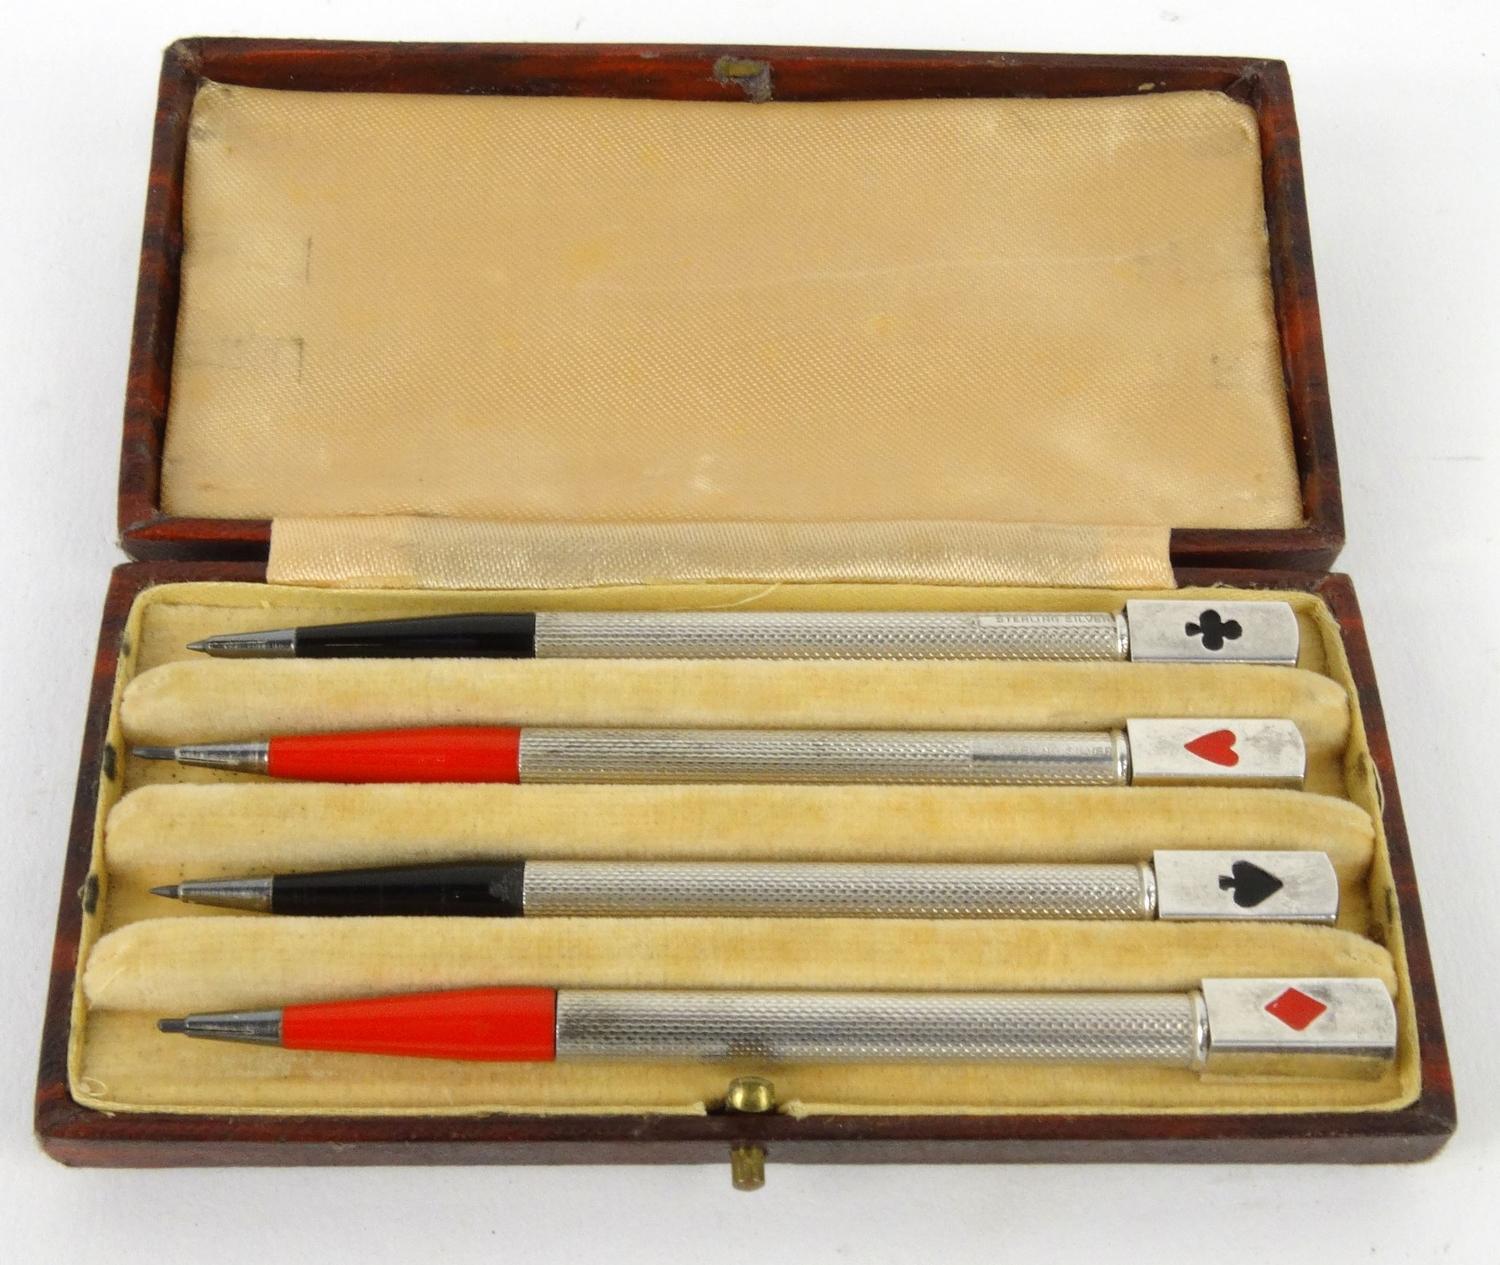 Cased set of four sterling silver and enamel bridge pencils, marked 'Sterling Silver', each pencil - Image 5 of 5